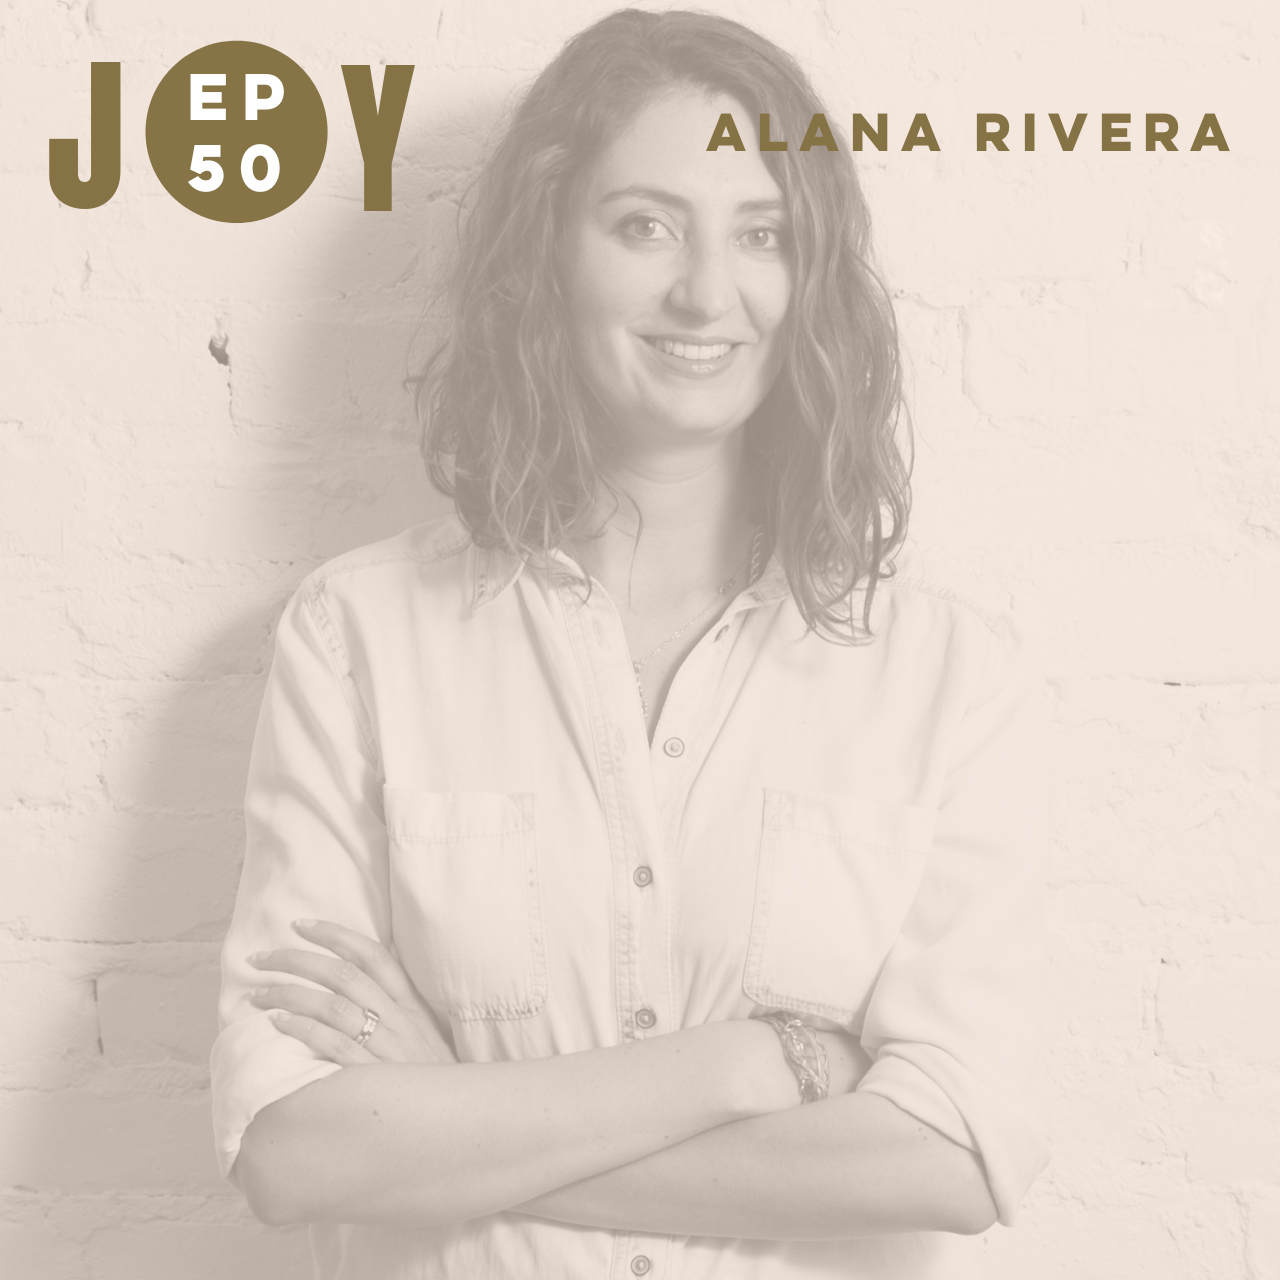 JOY IS NOW: LET'S TALK MOM GUILT WITH ALANA RIVERA